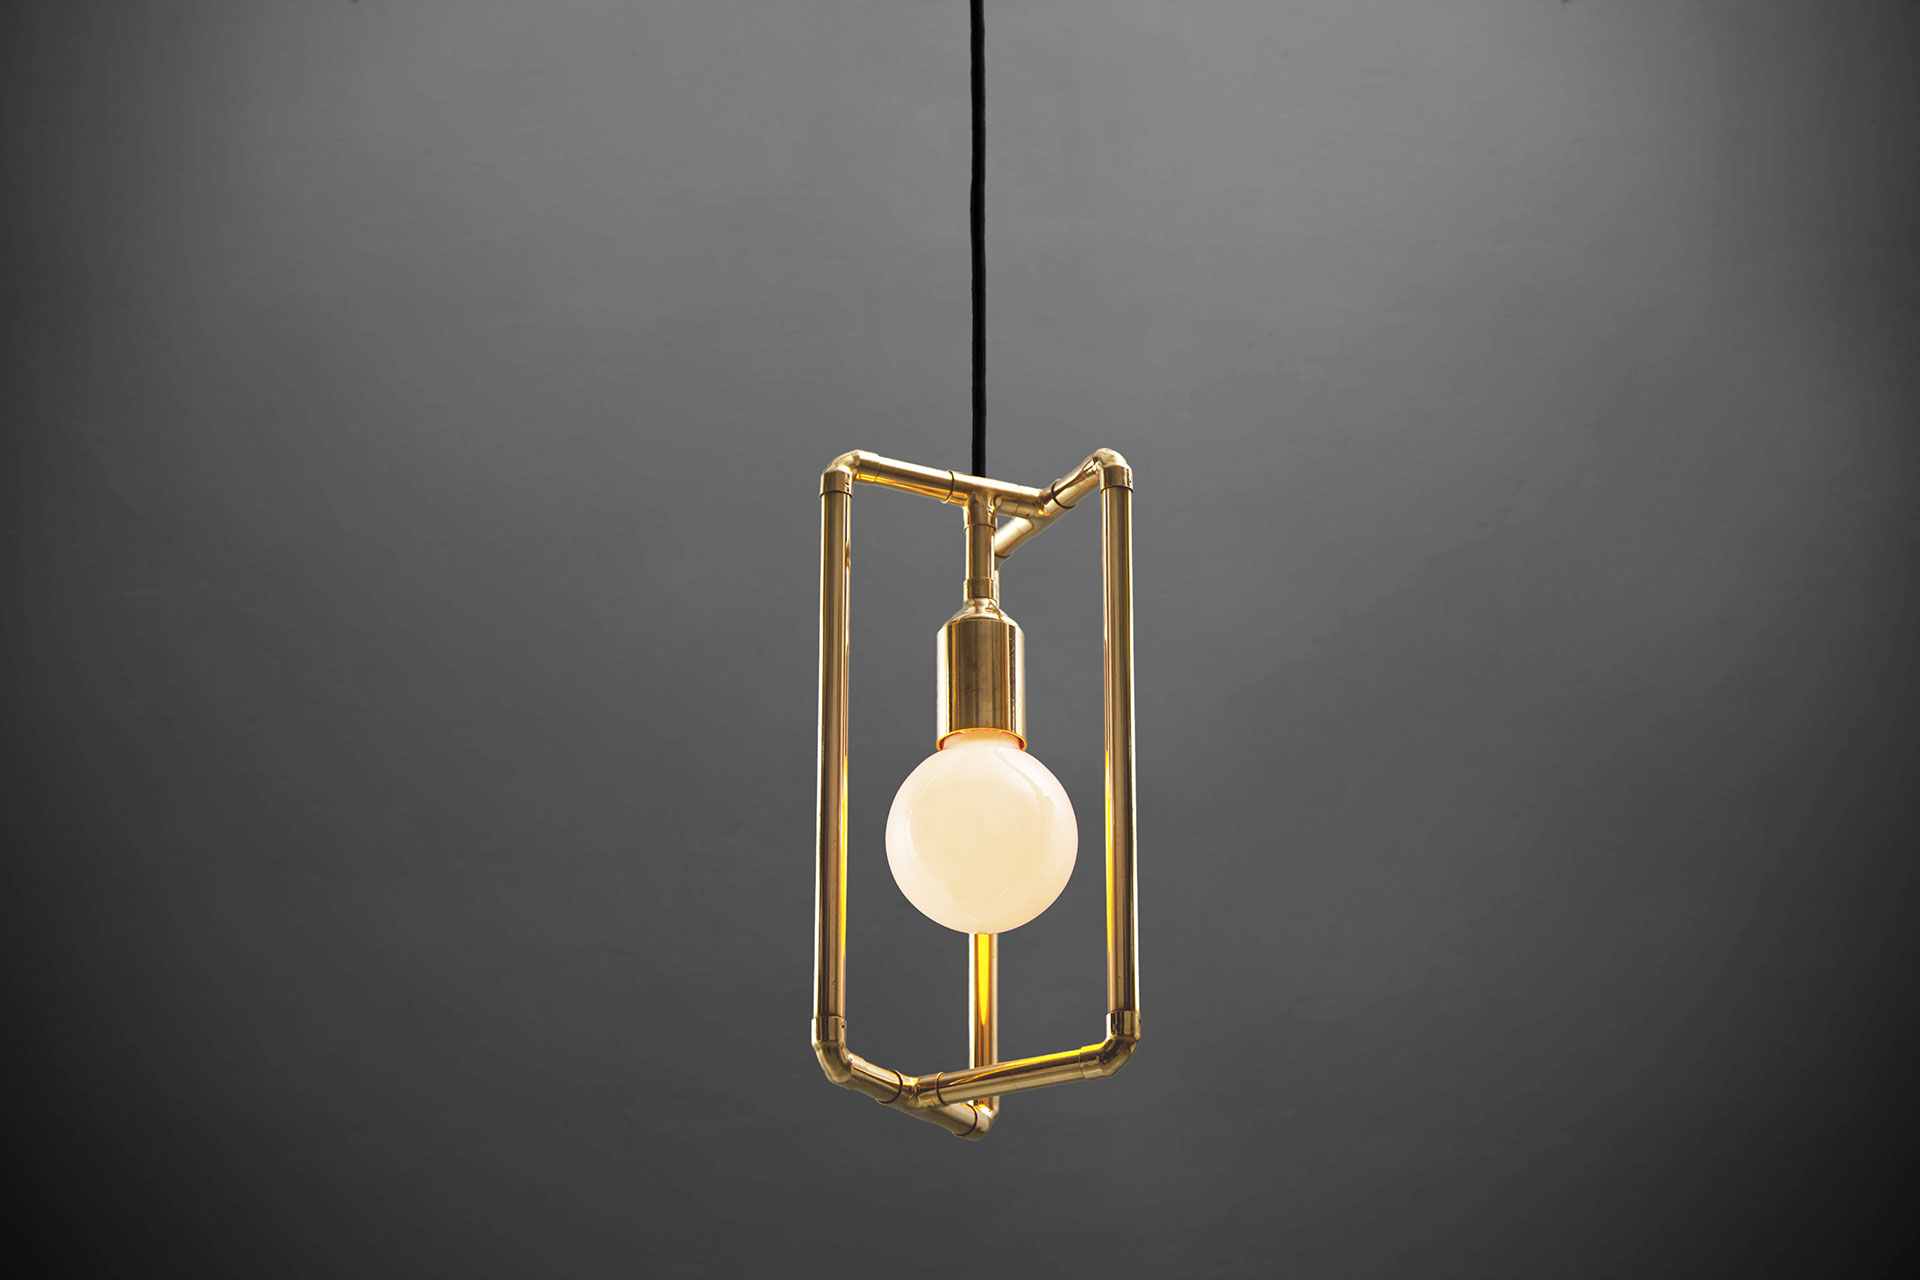 Gold pendant lamp inspired by modern industrial design